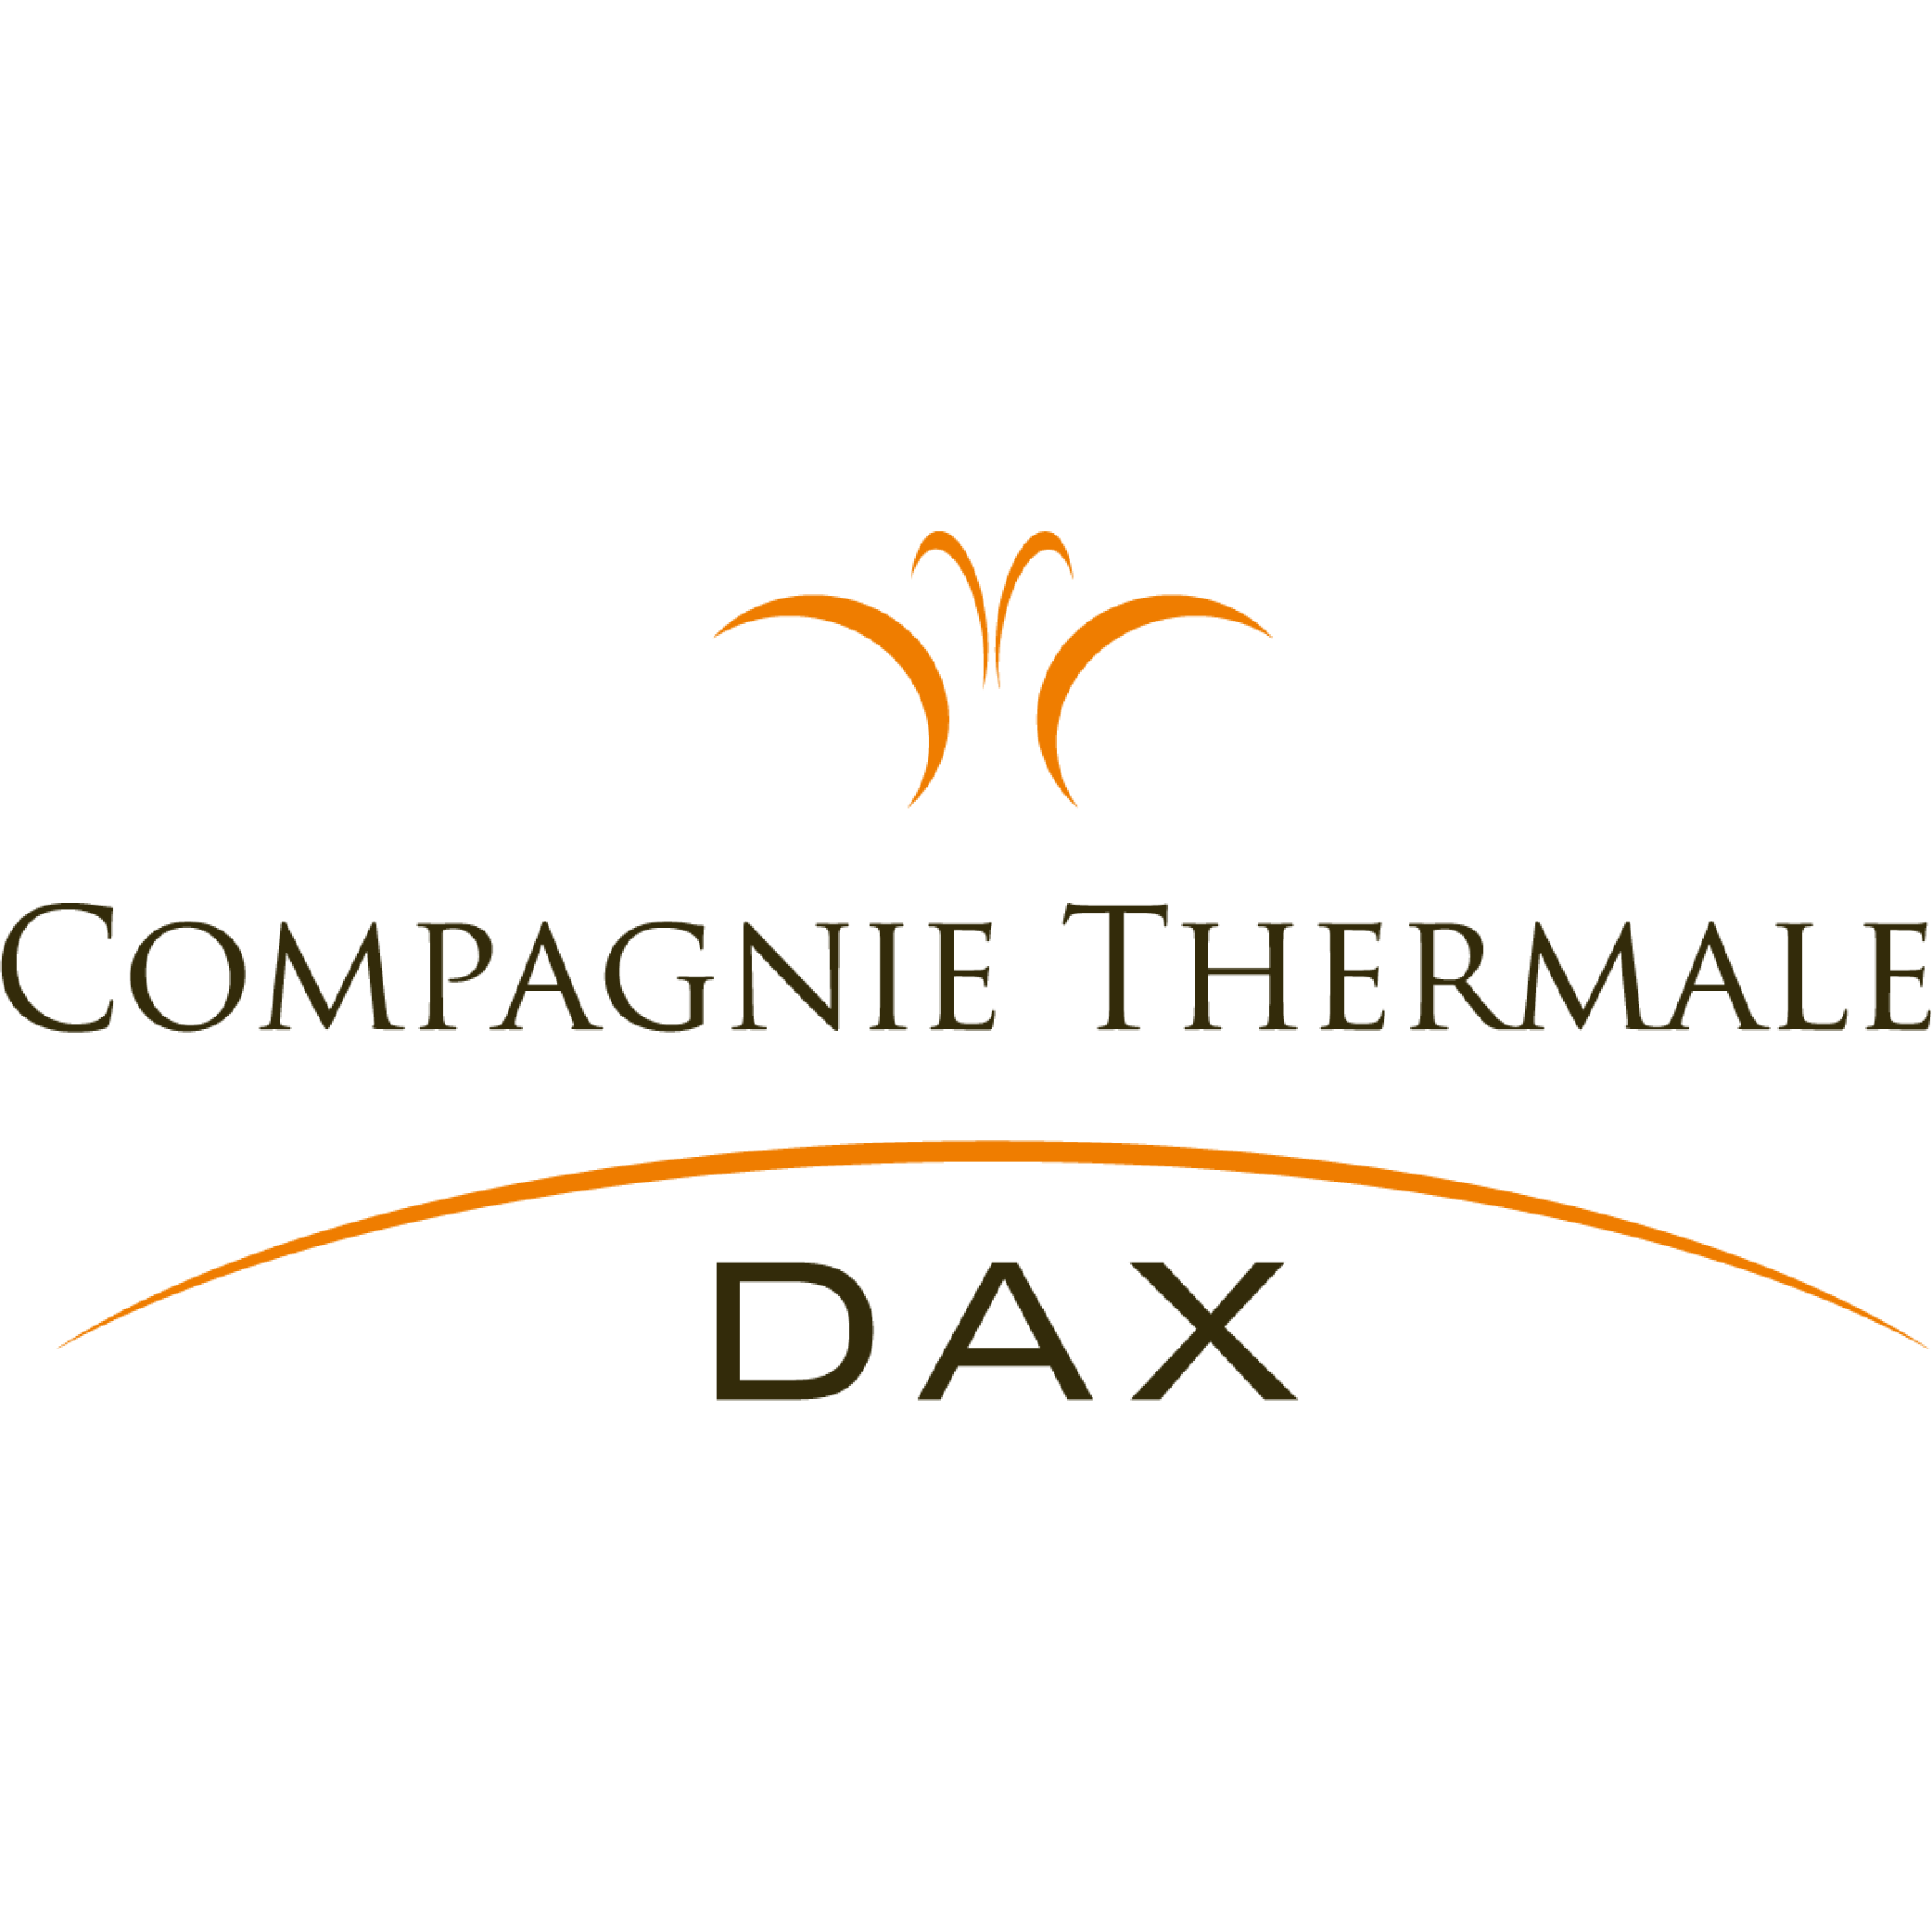 LOGO COMPAGNIE THERMALE DAX